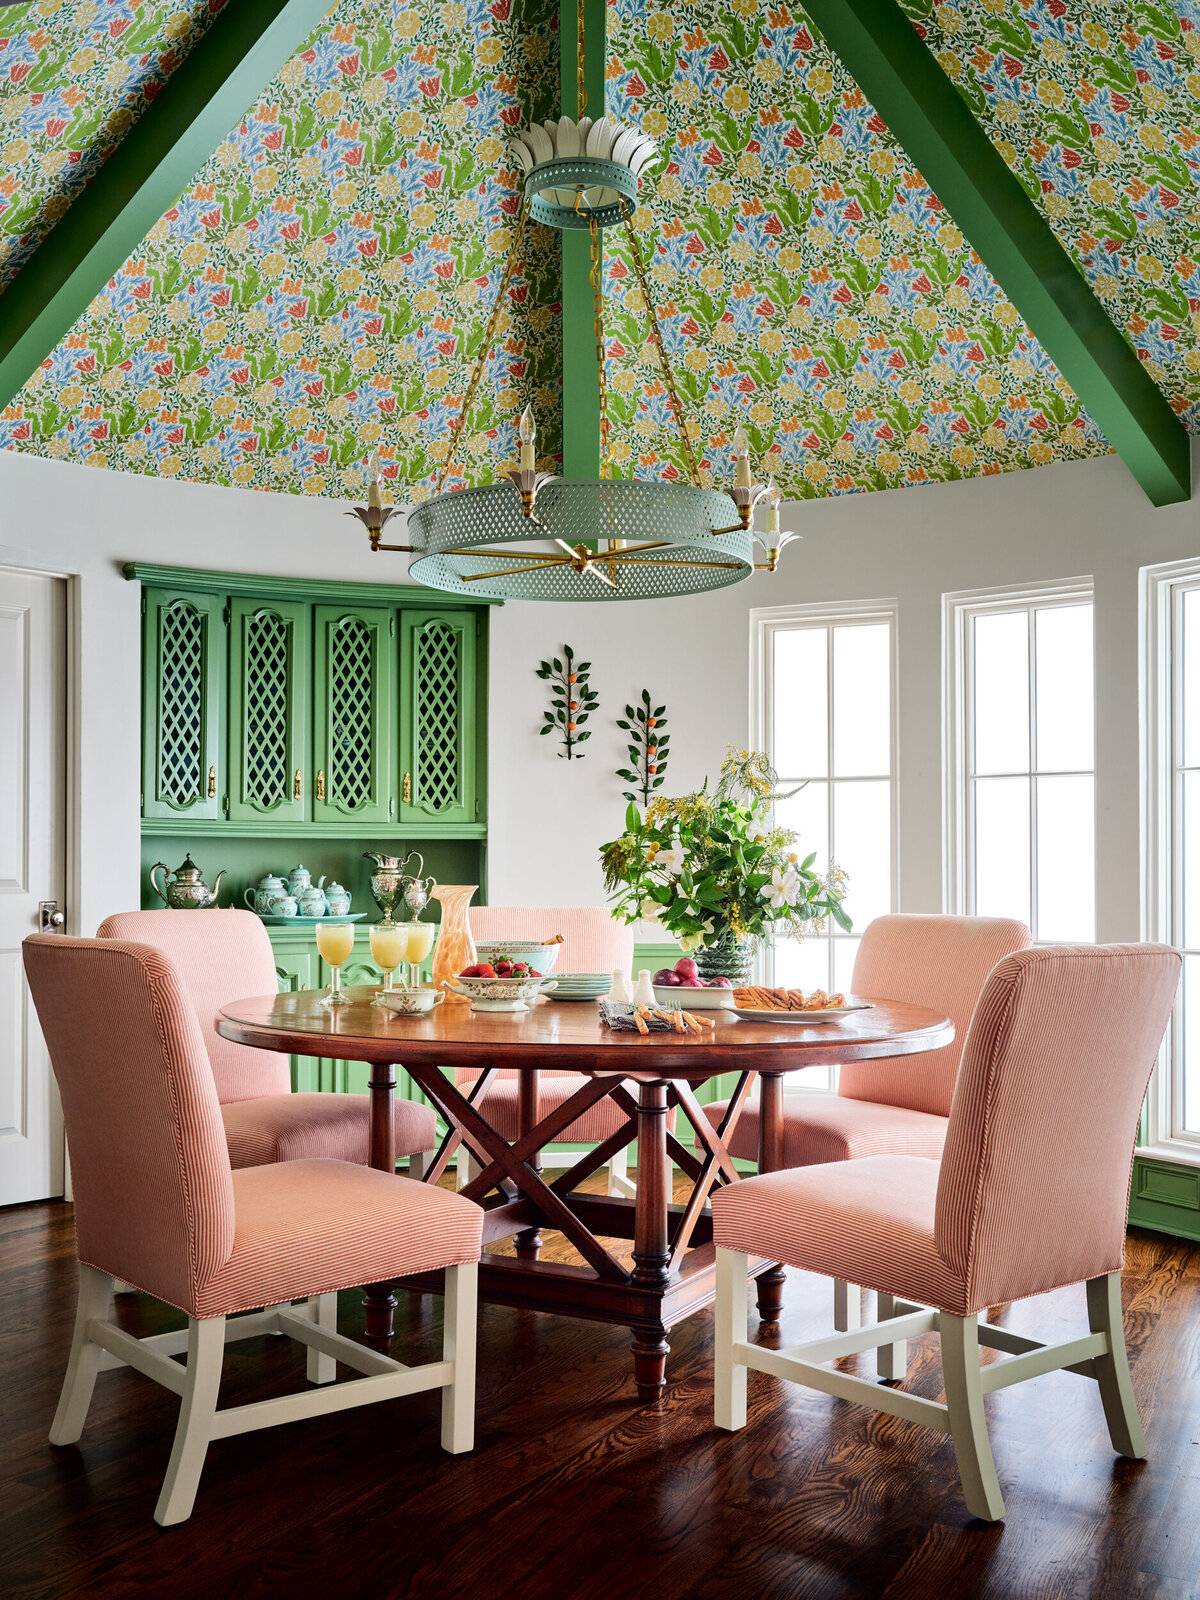 Green Ceiling Beams with Wallpaper with Breakfast Room Chairs and Table